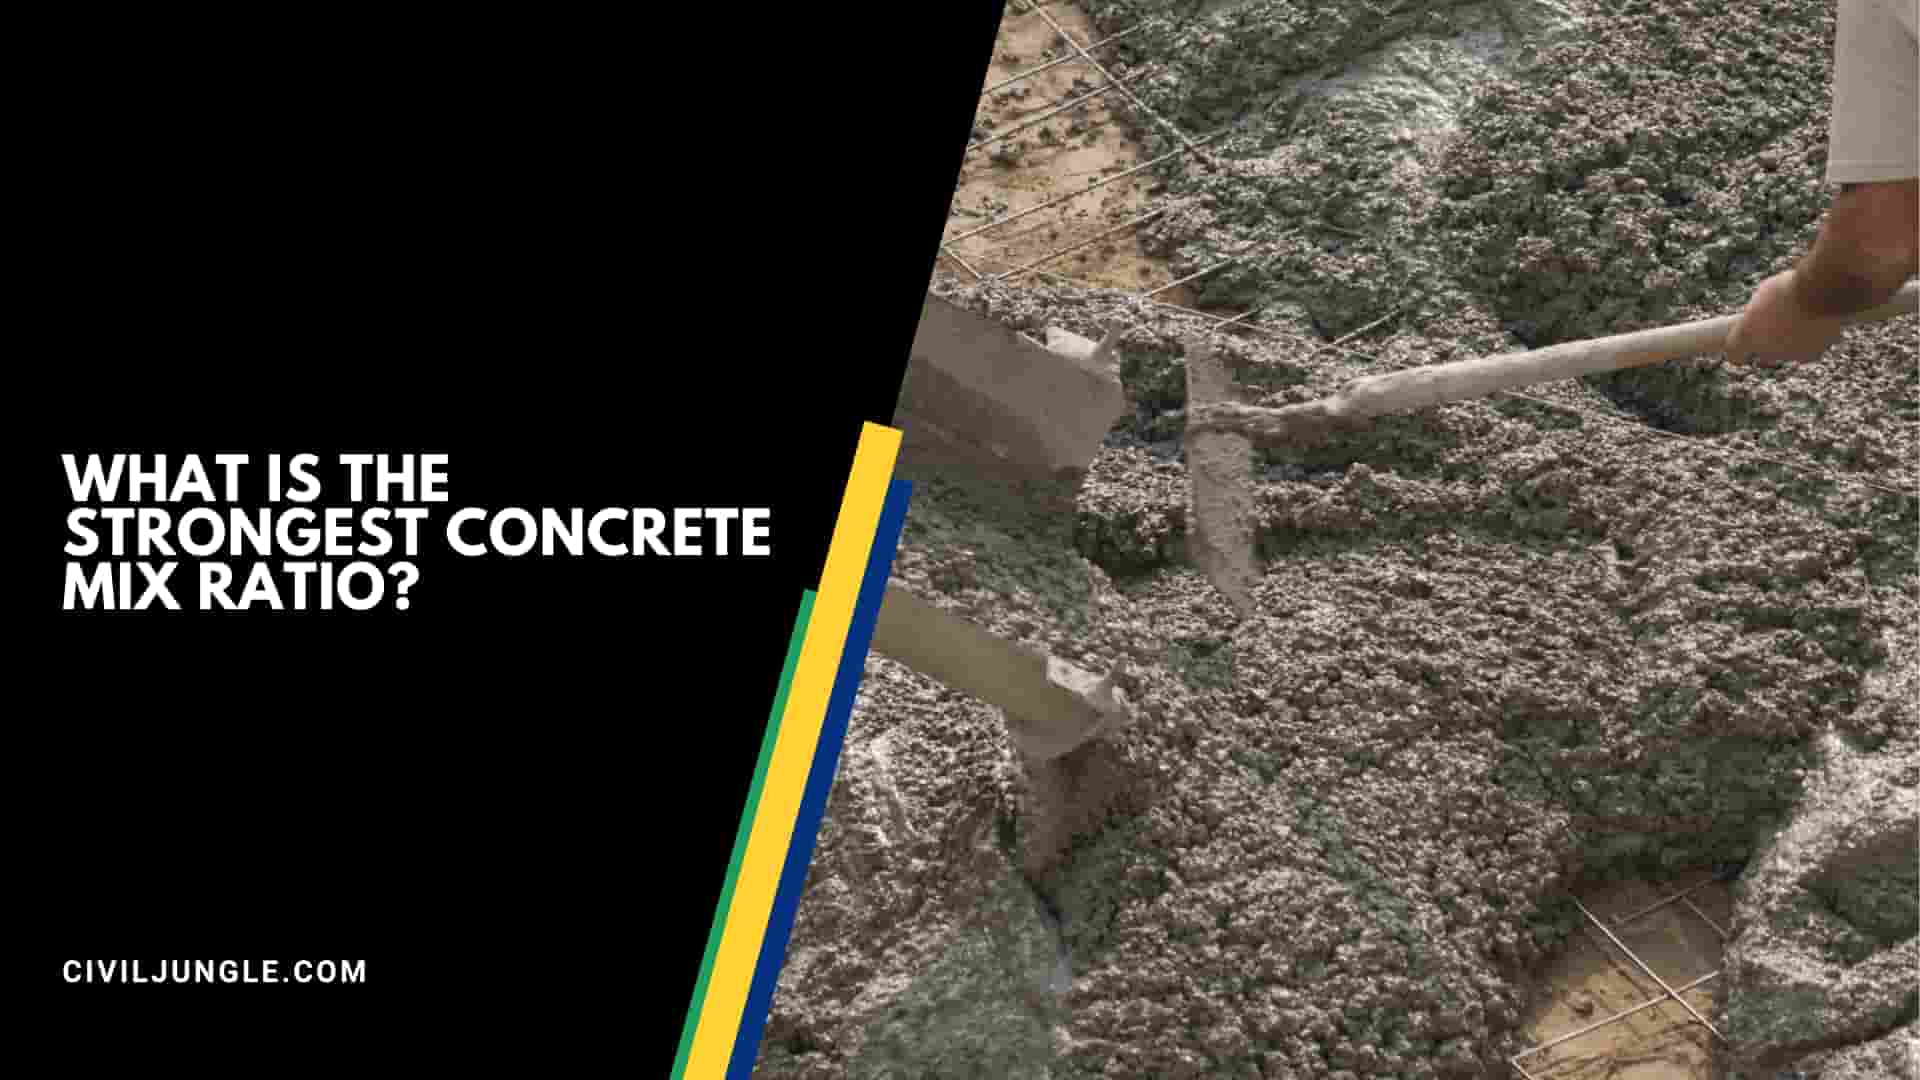 What Is The Strongest Concrete Mix Ratio?